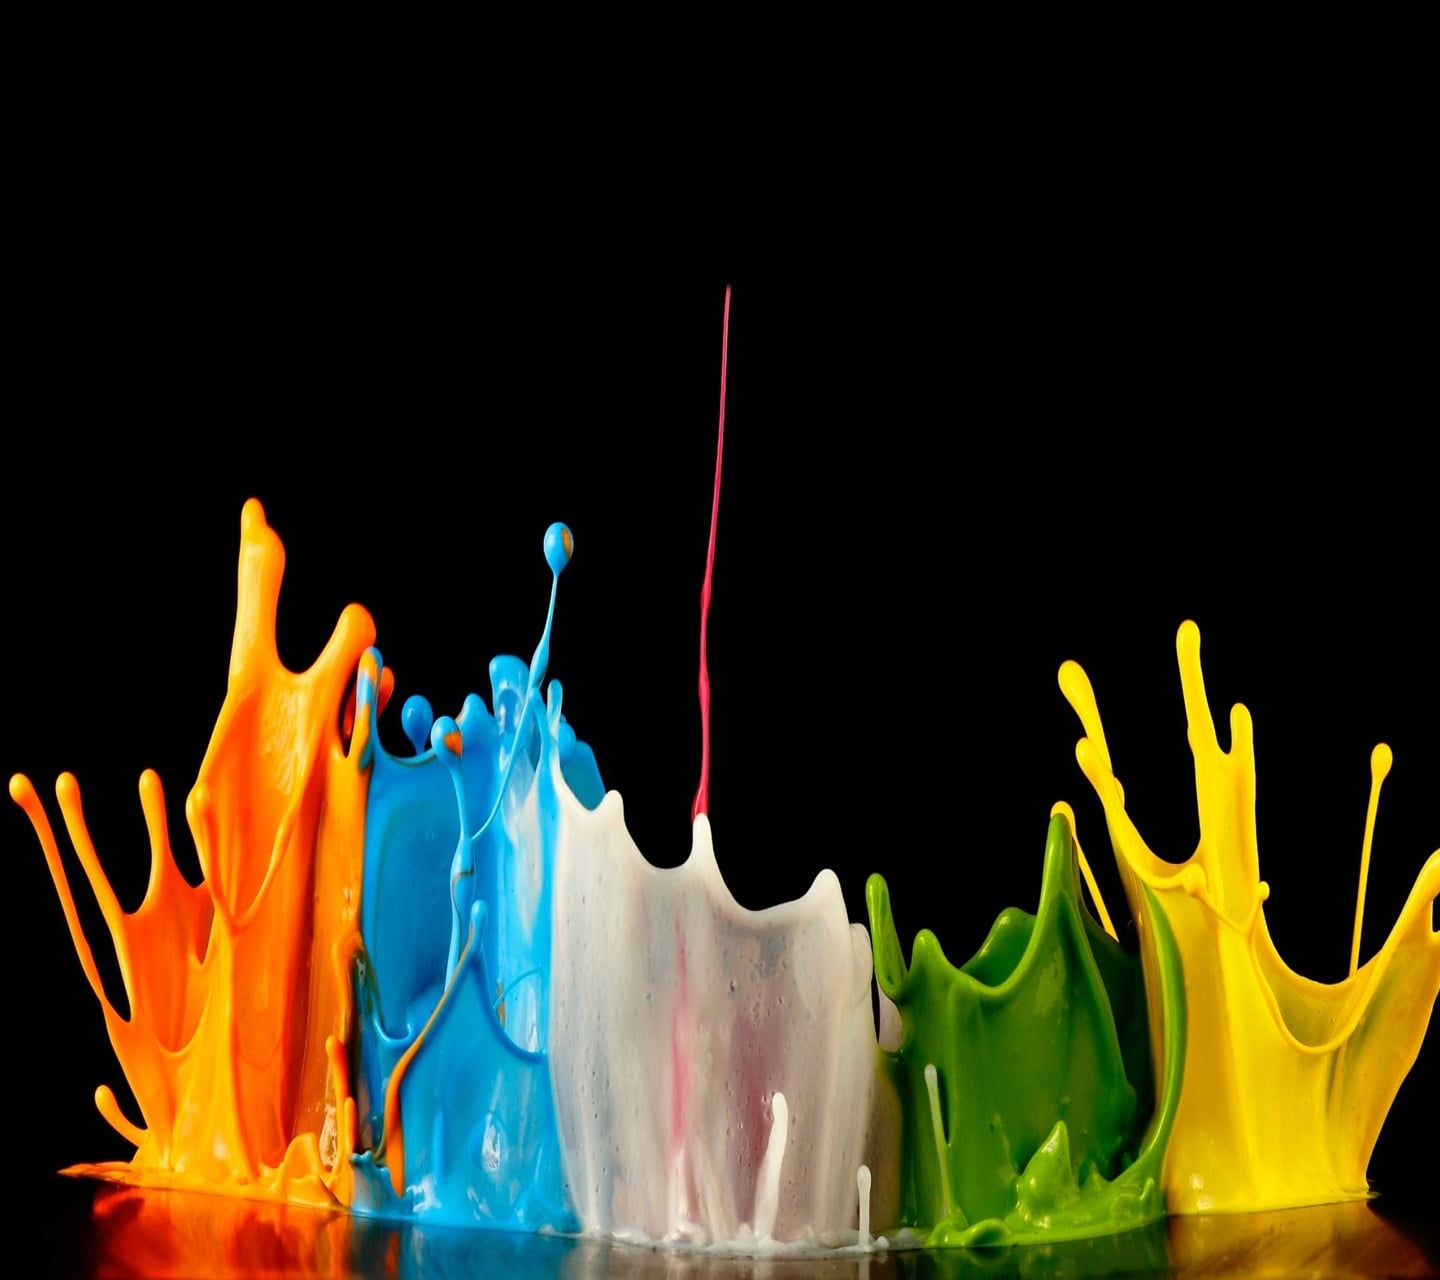 multicolored paint splash HD wallpaper, colorful, abstract, paint splatter